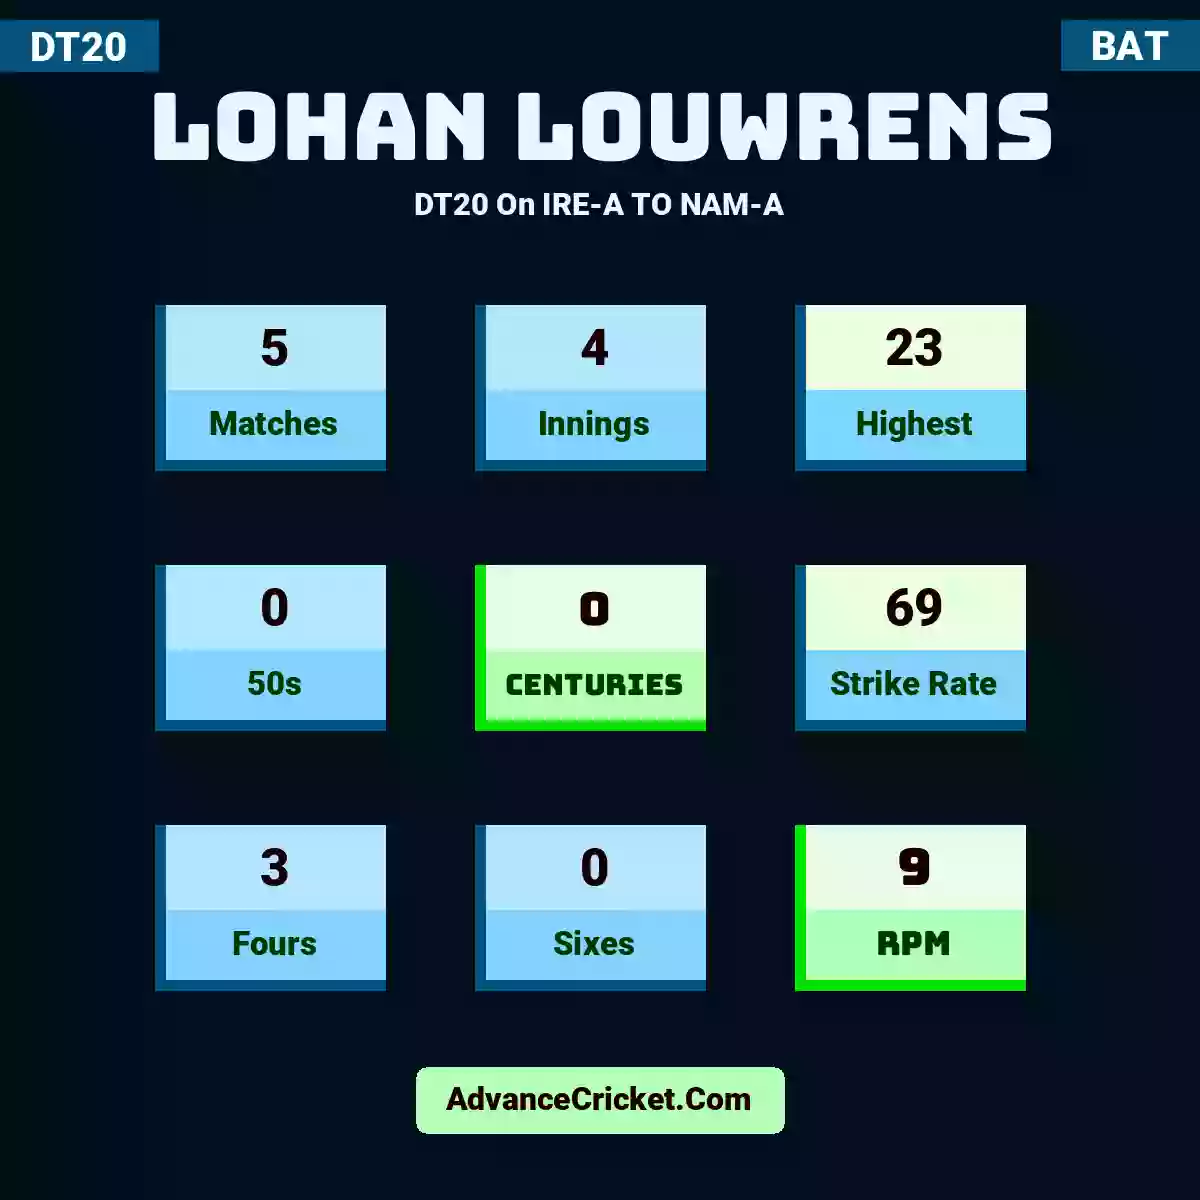 Lohan Louwrens DT20  On IRE-A TO NAM-A, Lohan Louwrens played 5 matches, scored 23 runs as highest, 0 half-centuries, and 0 centuries, with a strike rate of 69. l.louwrens hit 3 fours and 0 sixes, with an RPM of 9.